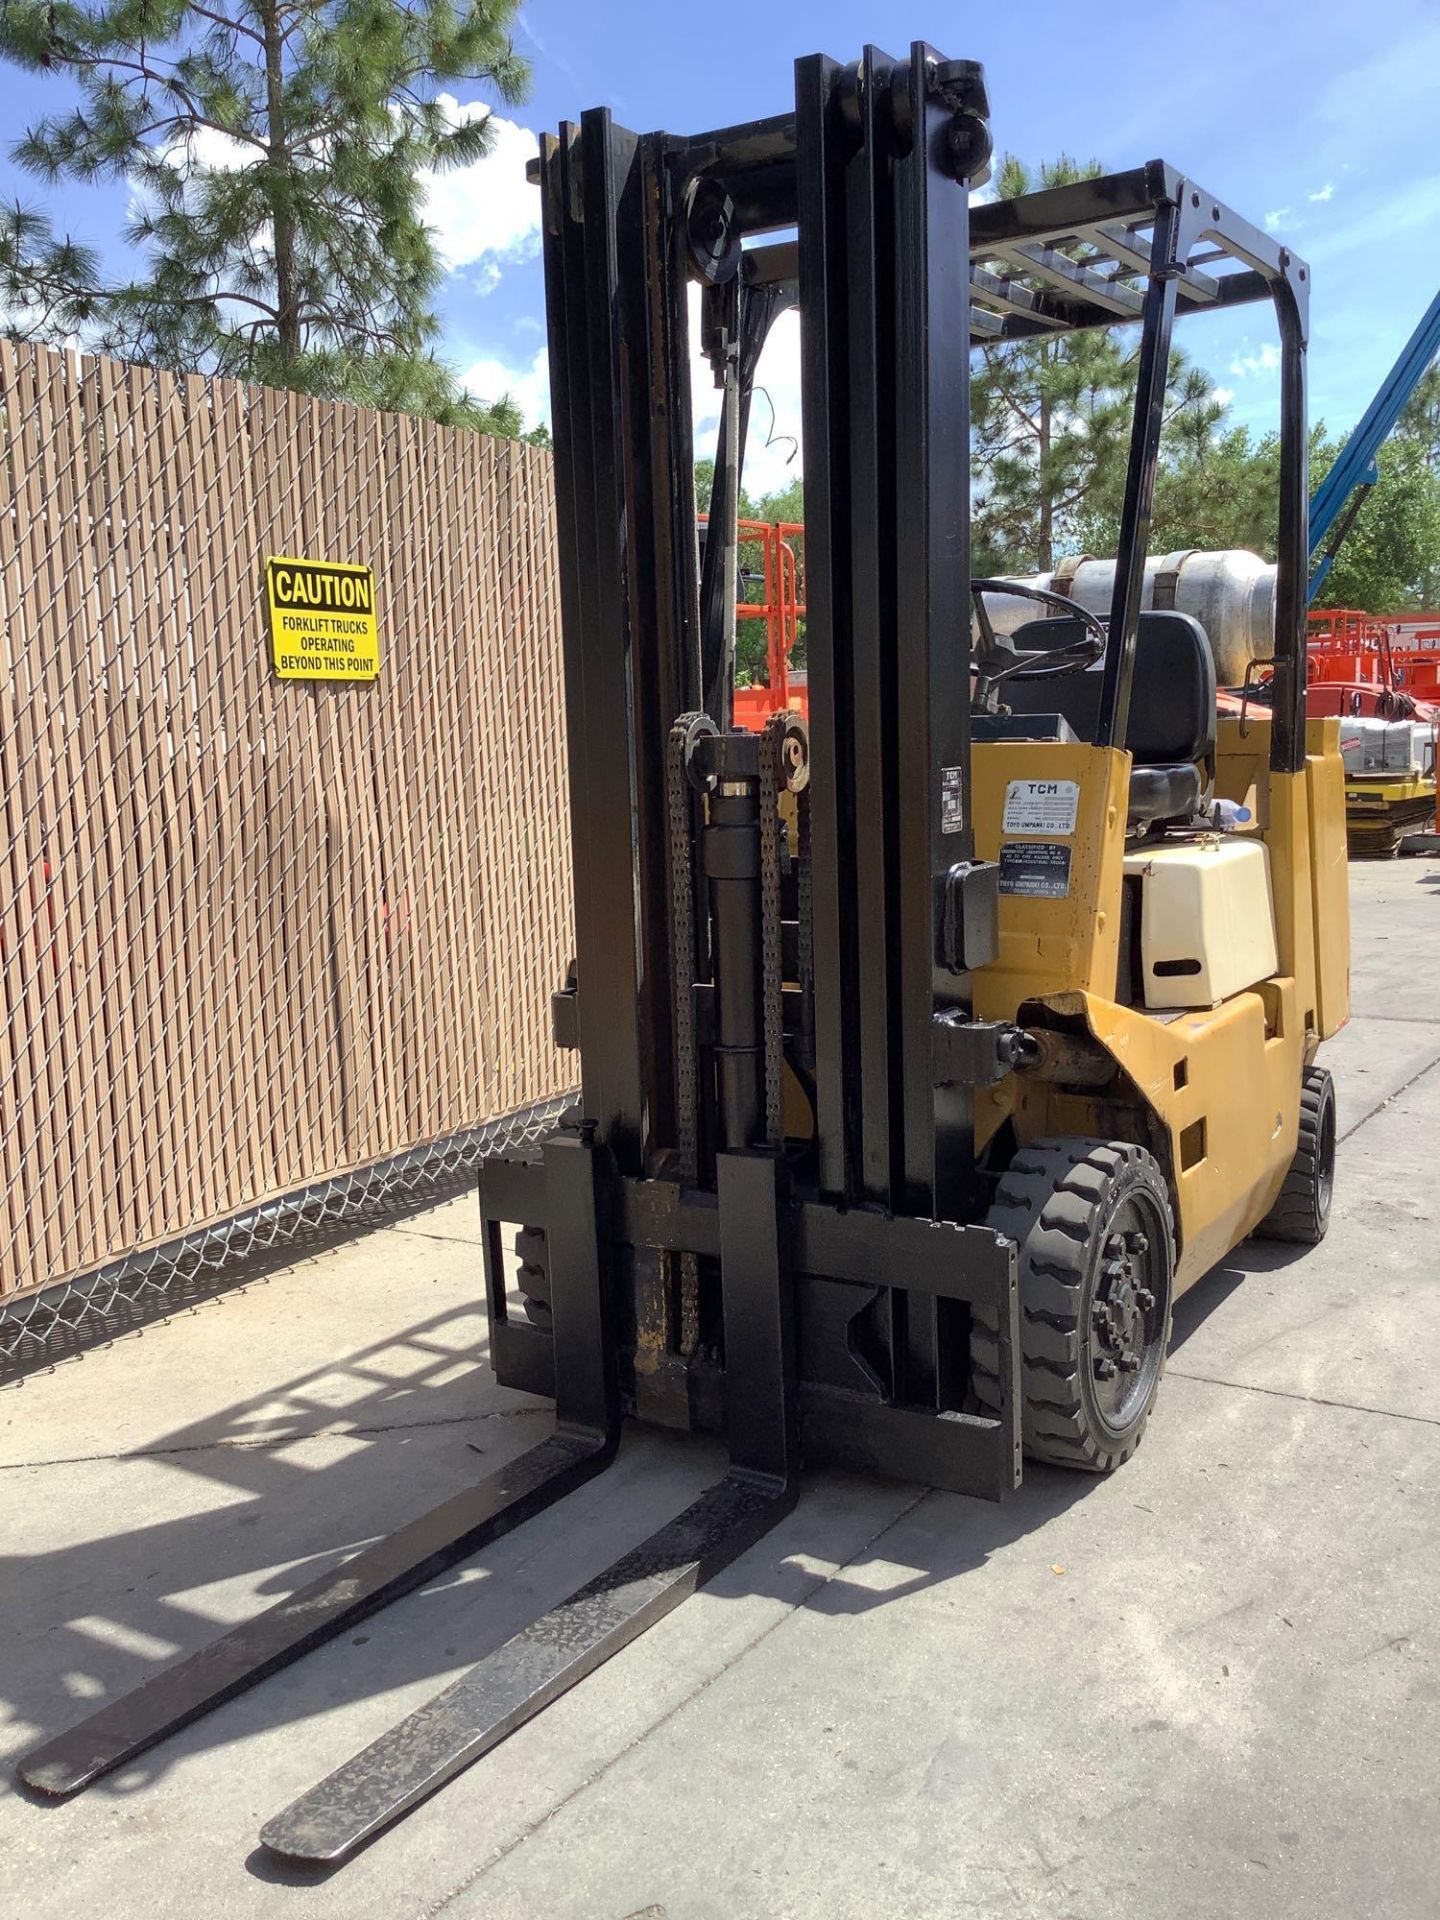 TCM FORKLIFT MODEL FCG25N6 , APPROX CAPACITY 5000LBS, TILT, RUNS AND OPERATES - Image 3 of 10